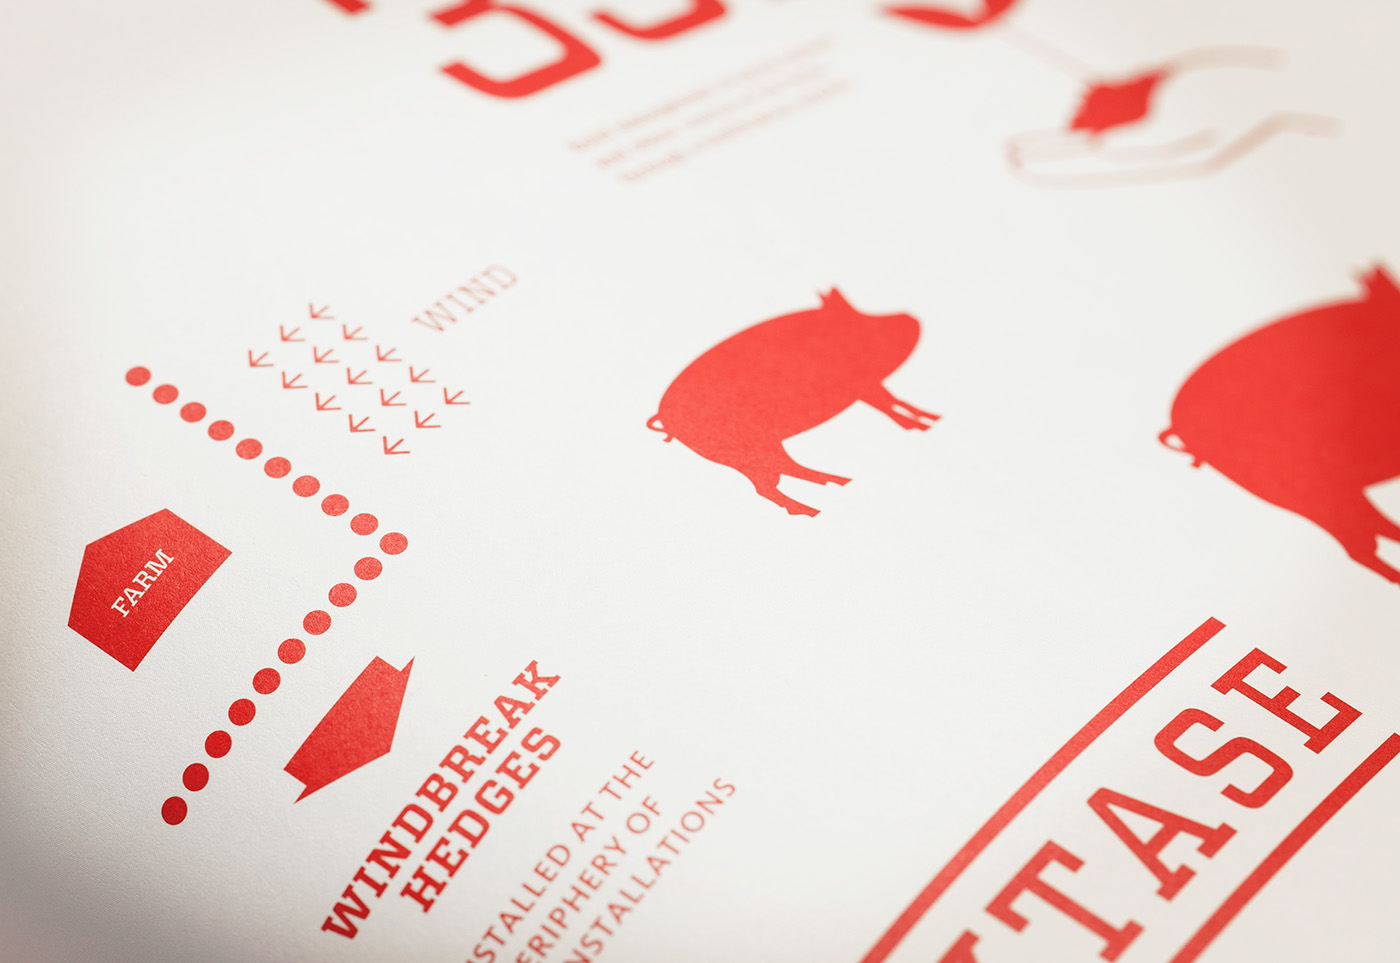 Food  pork Retail logo stationary butcher meat family tradition